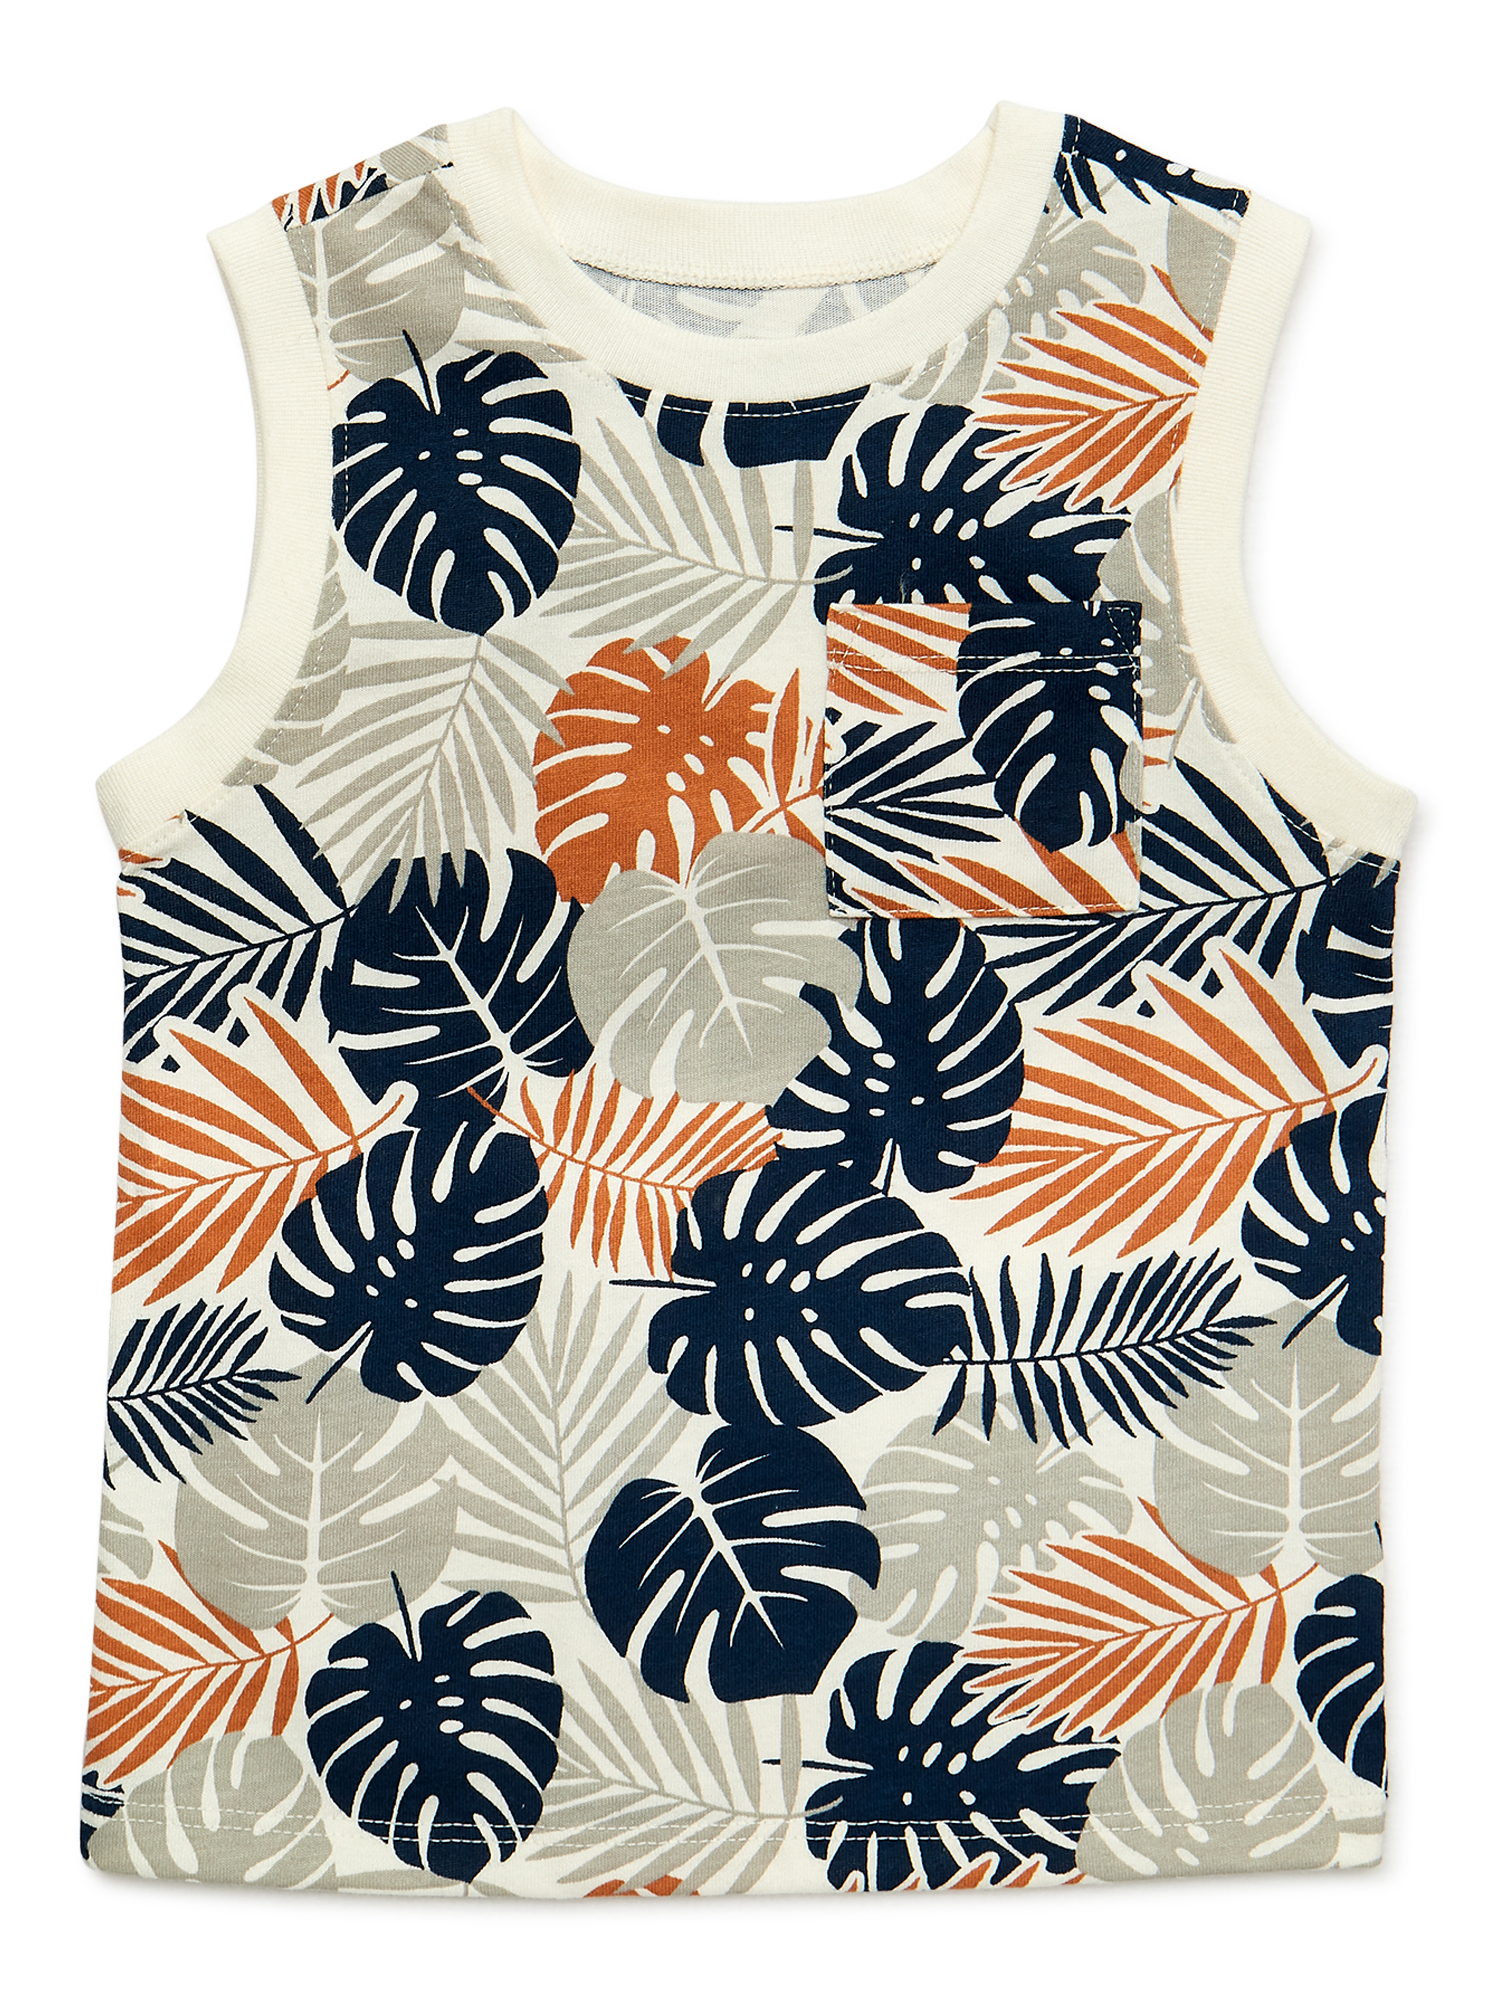 Garanimals Baby and Toddler Boys Print Muscle Tank Top, Sizes 12 Months-5T - image 1 of 4